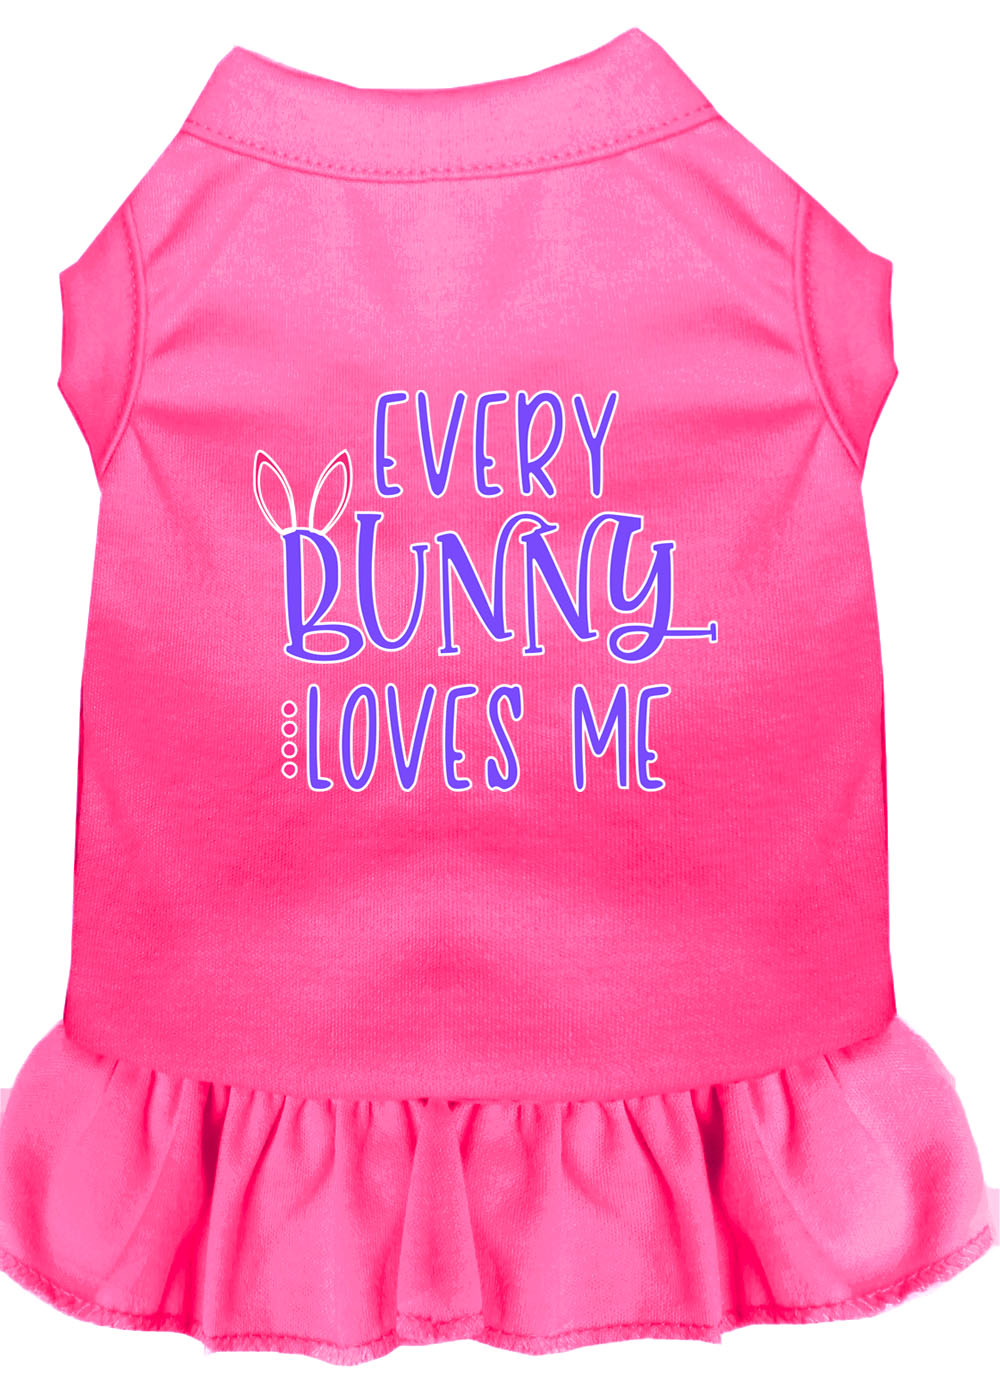 Every Bunny Loves me Screen Print Dog Dress Bright Pink XS